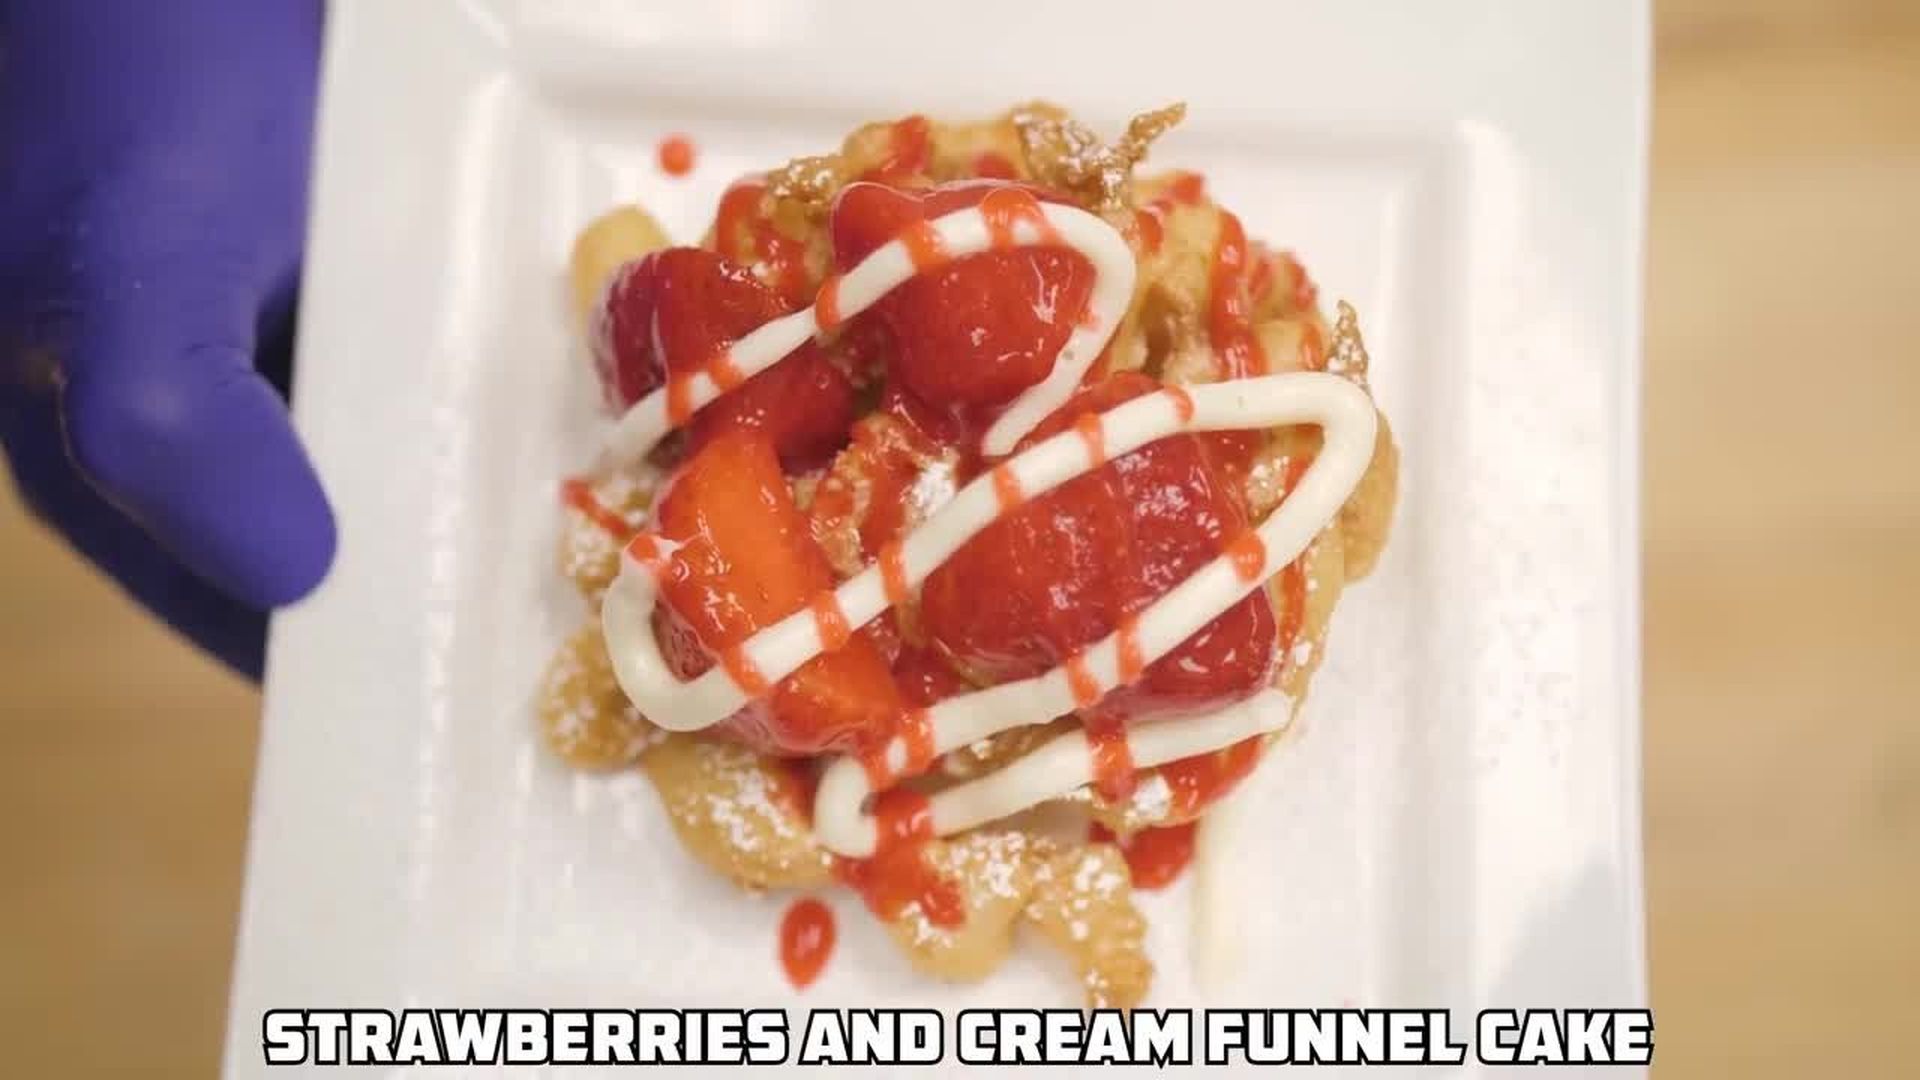 Will It Doughnut: How to Make A Strawberries and Cream Funnel Cake